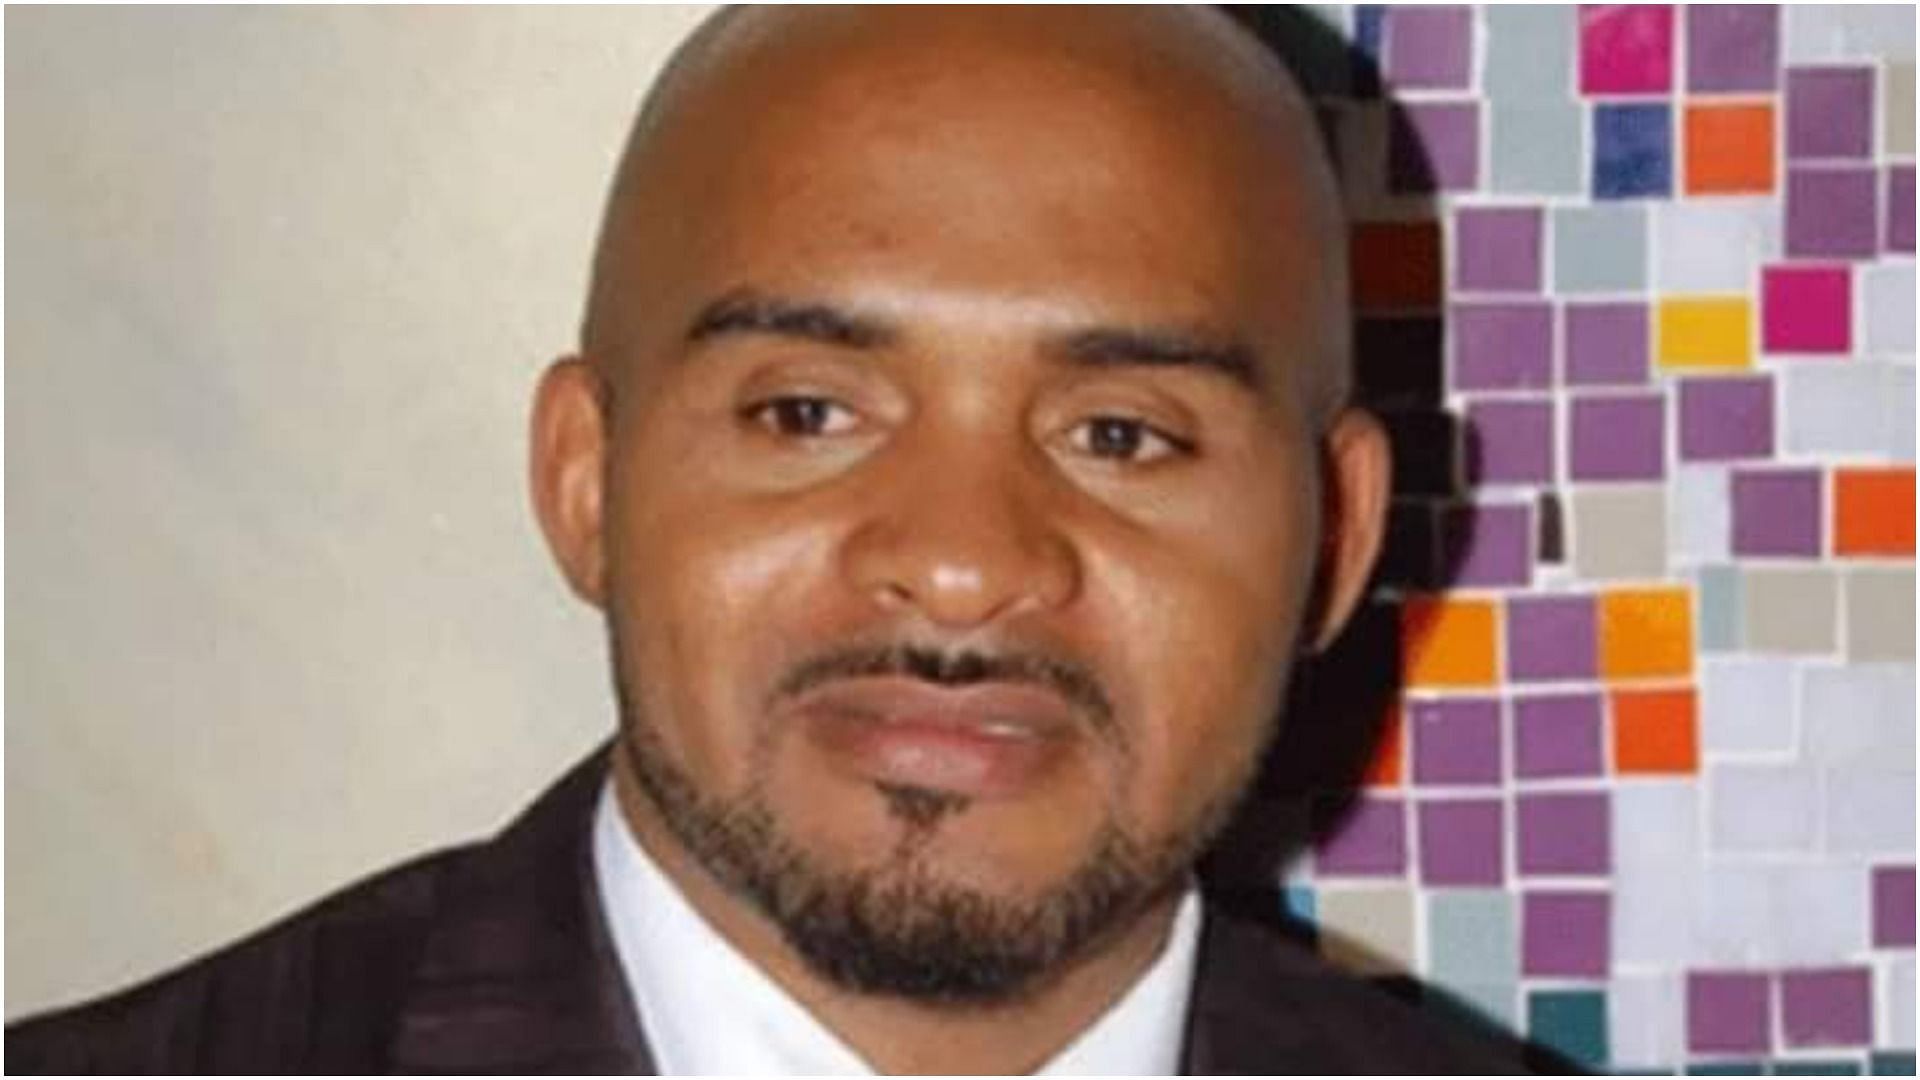 Leo Mezie recently died at the age of 46 (Image via SLukako/Twitter)